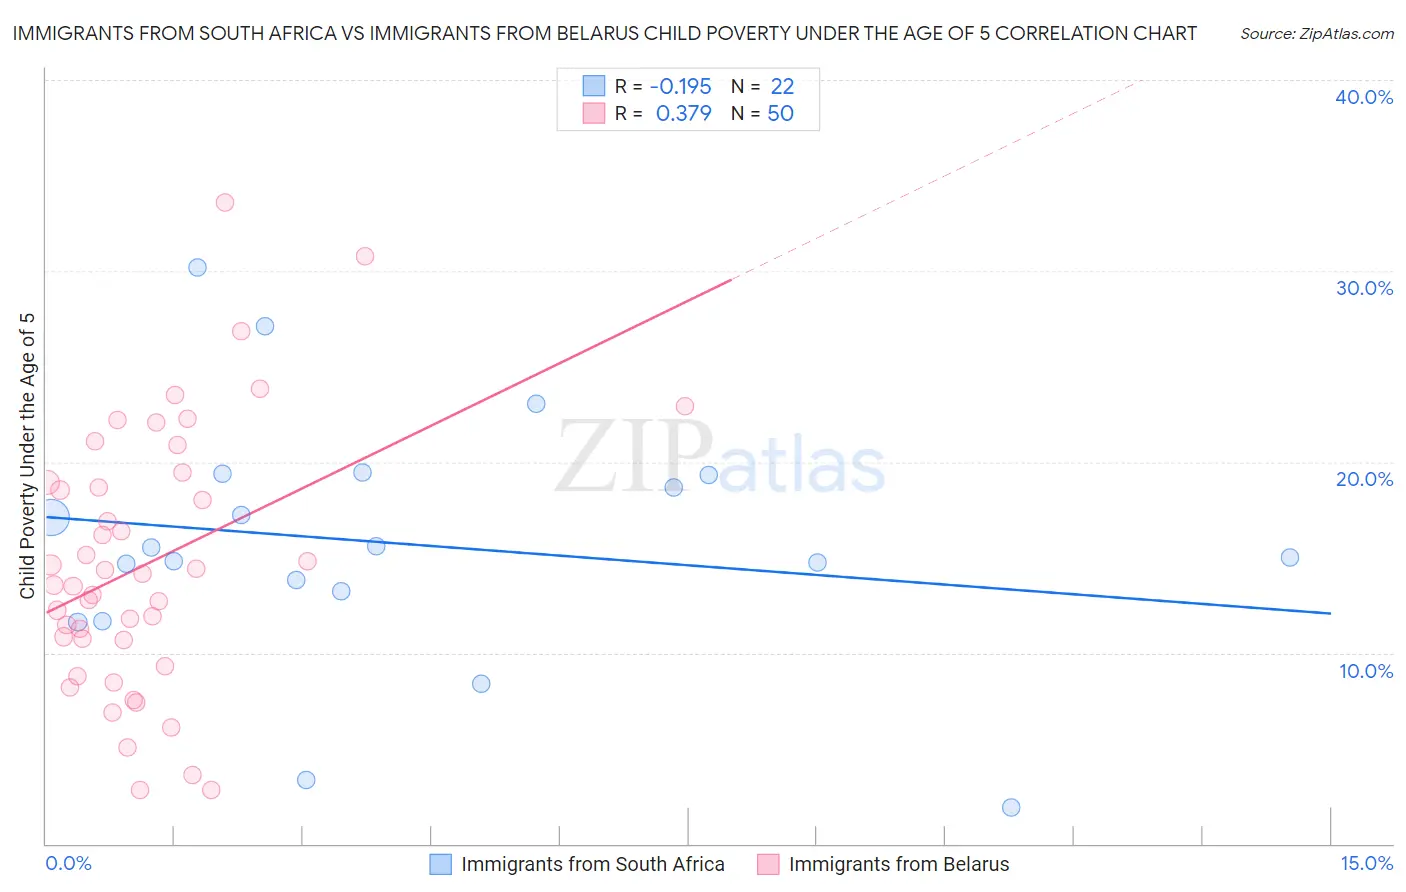 Immigrants from South Africa vs Immigrants from Belarus Child Poverty Under the Age of 5